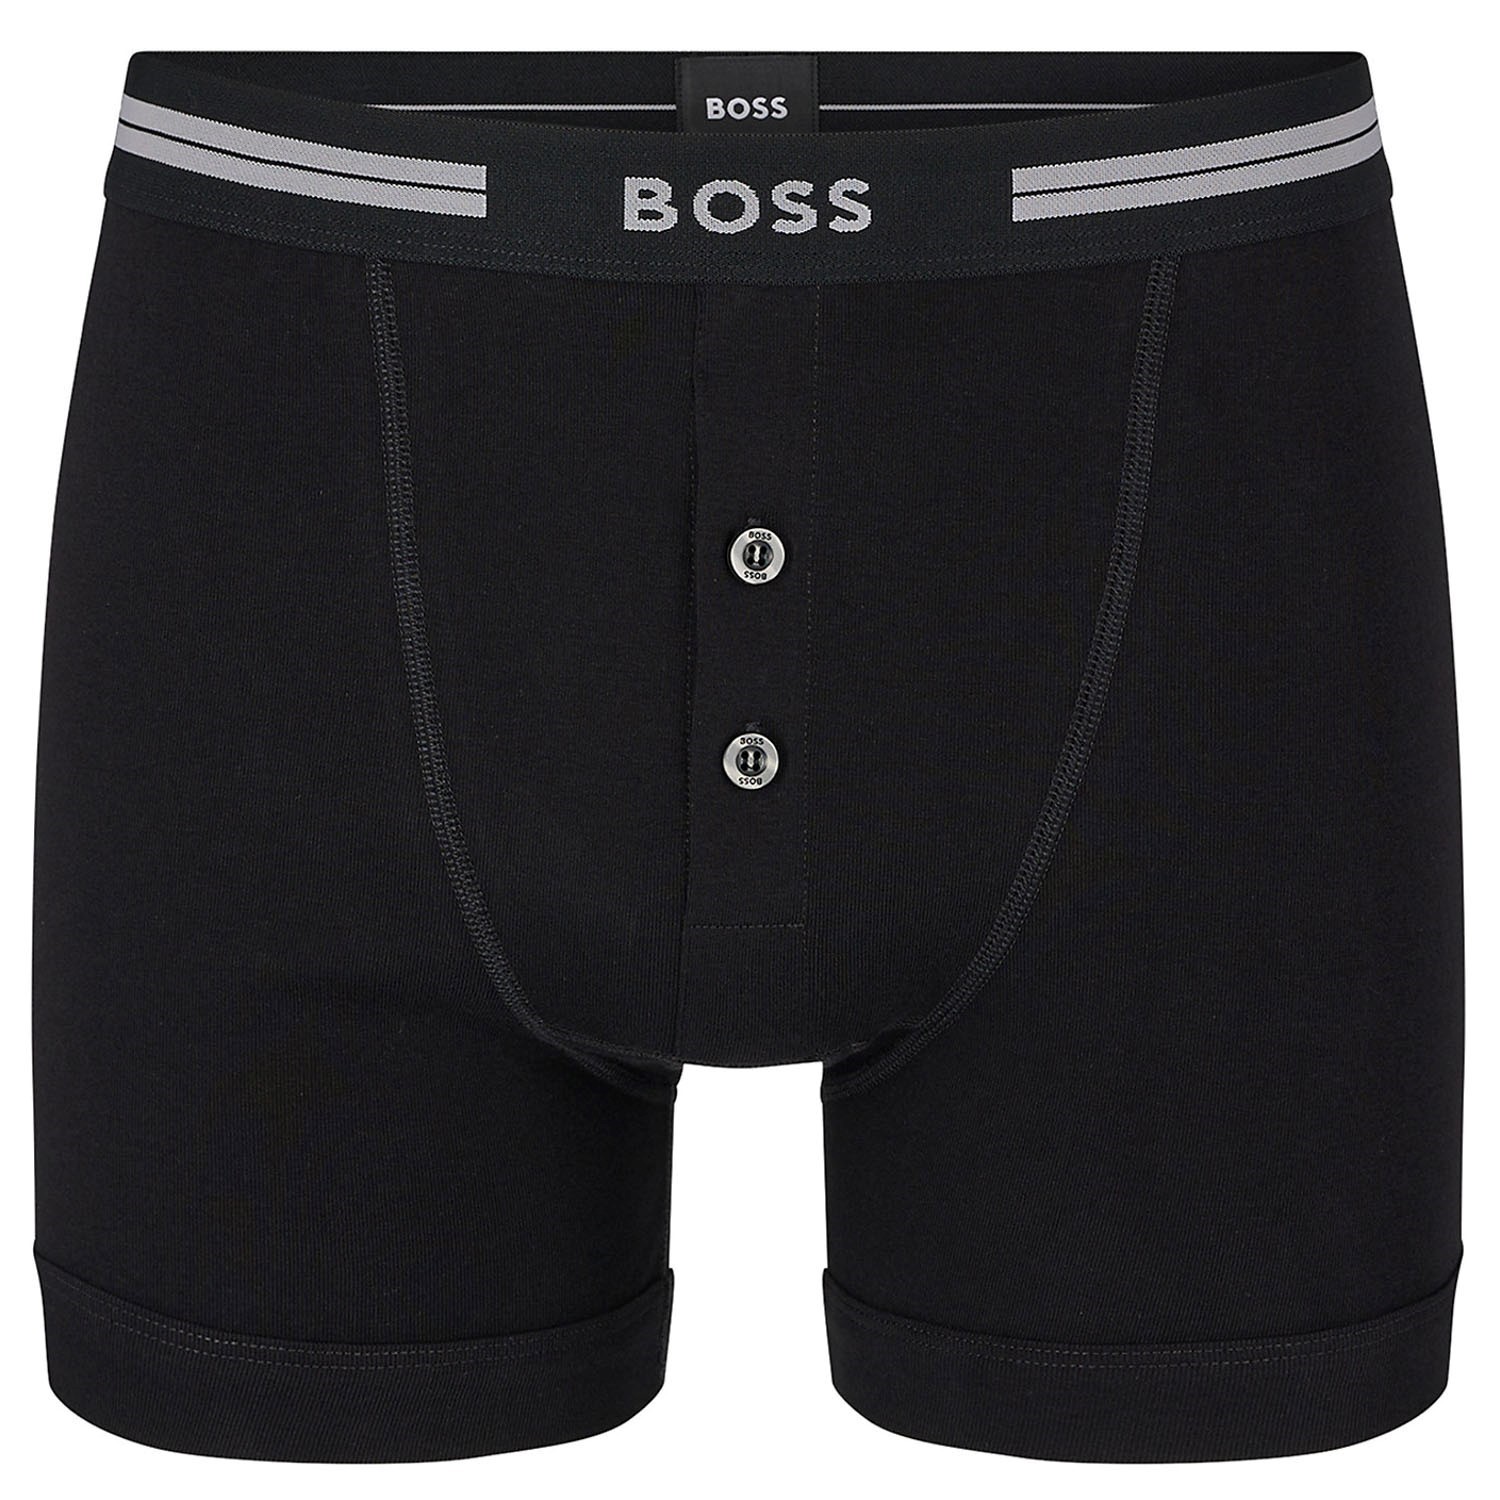 BOSS Button Front Shorts - Boxer - Trunks - Upperty.co.uk